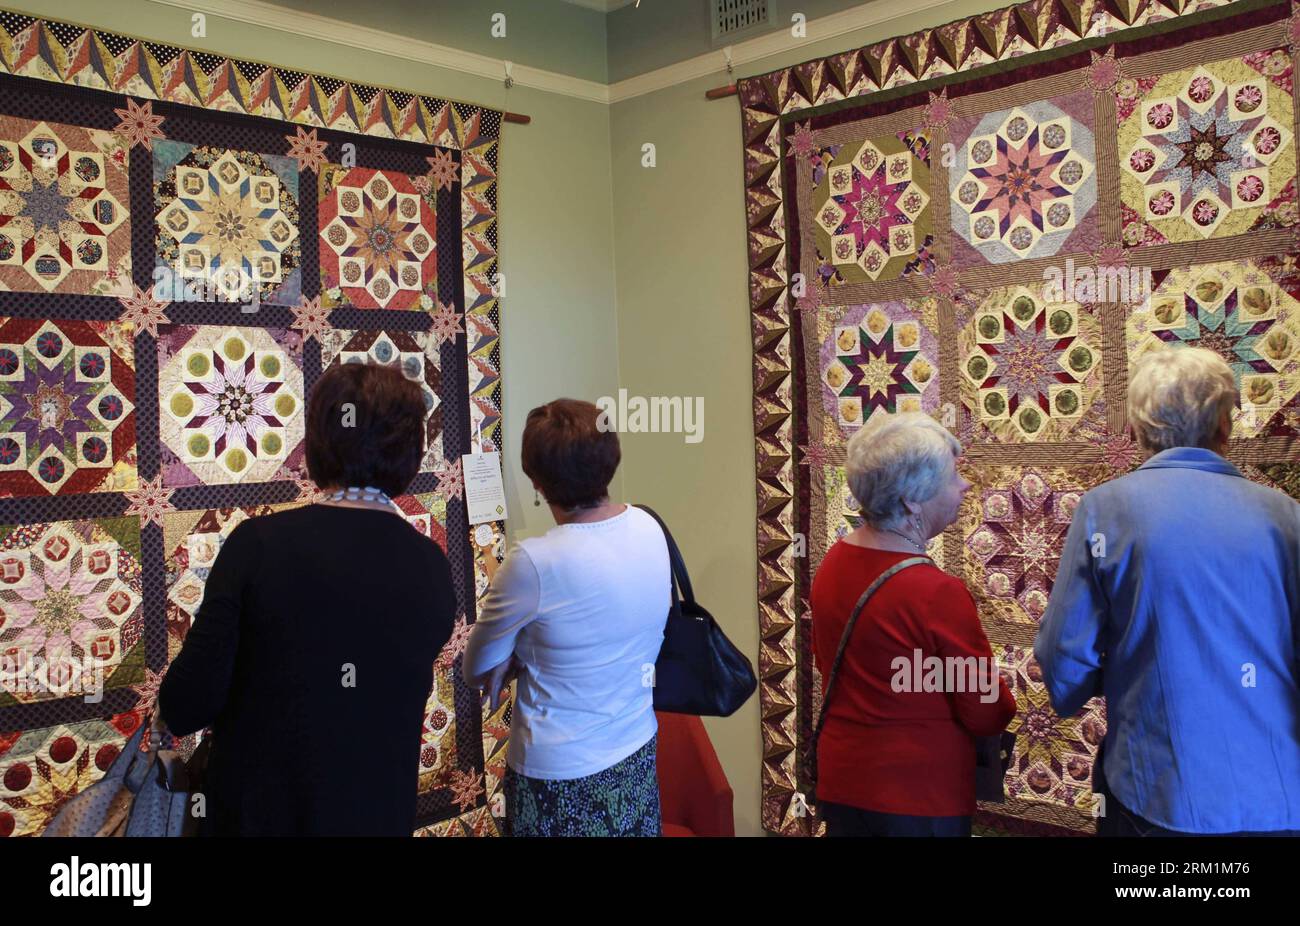 Bildnummer: 59598384  Datum: 03.05.2013  Copyright: imago/Xinhua (130503) -- SYDNEY, May 3, 2013 (Xinhua) -- Visitors attend the Brush Farm Quilt show in Rhyde out of Sydney, Australia, on May 3, 2013. The quilt show is under the sponsorship of the Quilters Guild of the New South Wales state of Australia. Two exquisite quilts will be auctioned off to raise funds for the Special Olympics. (Xinhua/Jin Linpeng) (djj) AUSTRALIA-SYDNEY-QUILT SHOW PUBLICATIONxNOTxINxCHN xcb x0x 2013 quer      59598384 Date 03 05 2013 Copyright Imago XINHUA  Sydney May 3 2013 XINHUA Visitors attend The Brush Farm Qui Stock Photo